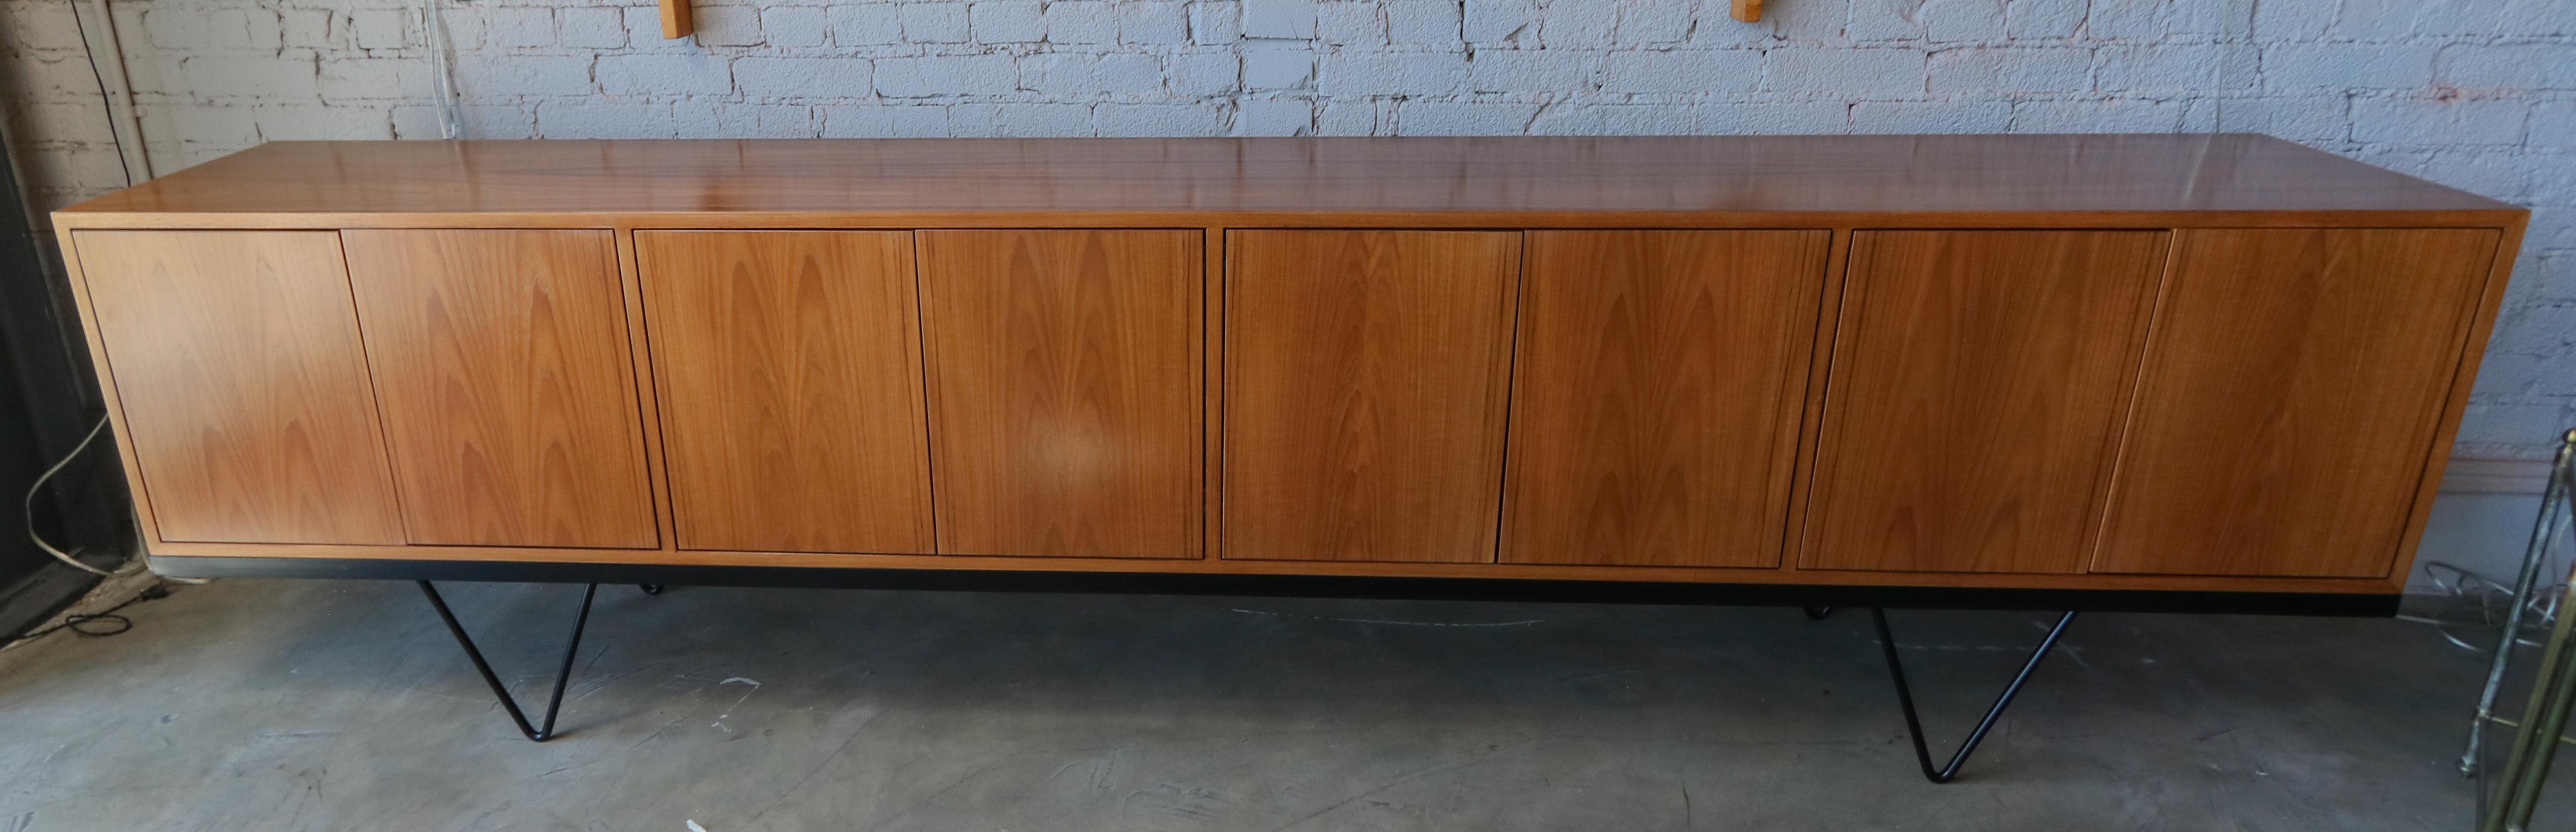 Mid-Century Modern Custom Midcentury Style Teak Sideboard with Black Metal Base by Adesso Imports For Sale